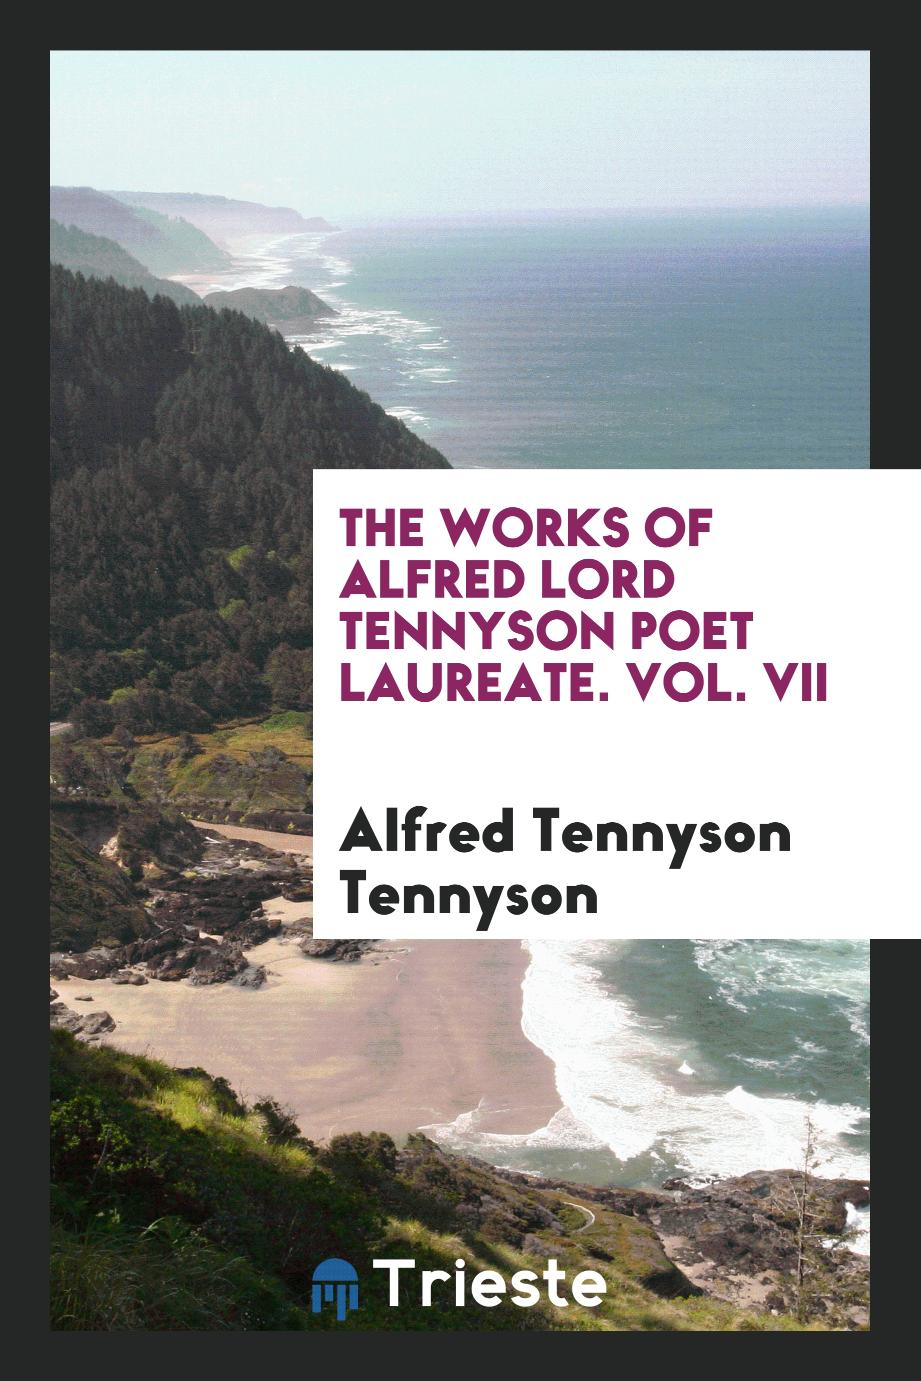 The works of Alfred Lord Tennyson poet laureate. Vol. VII